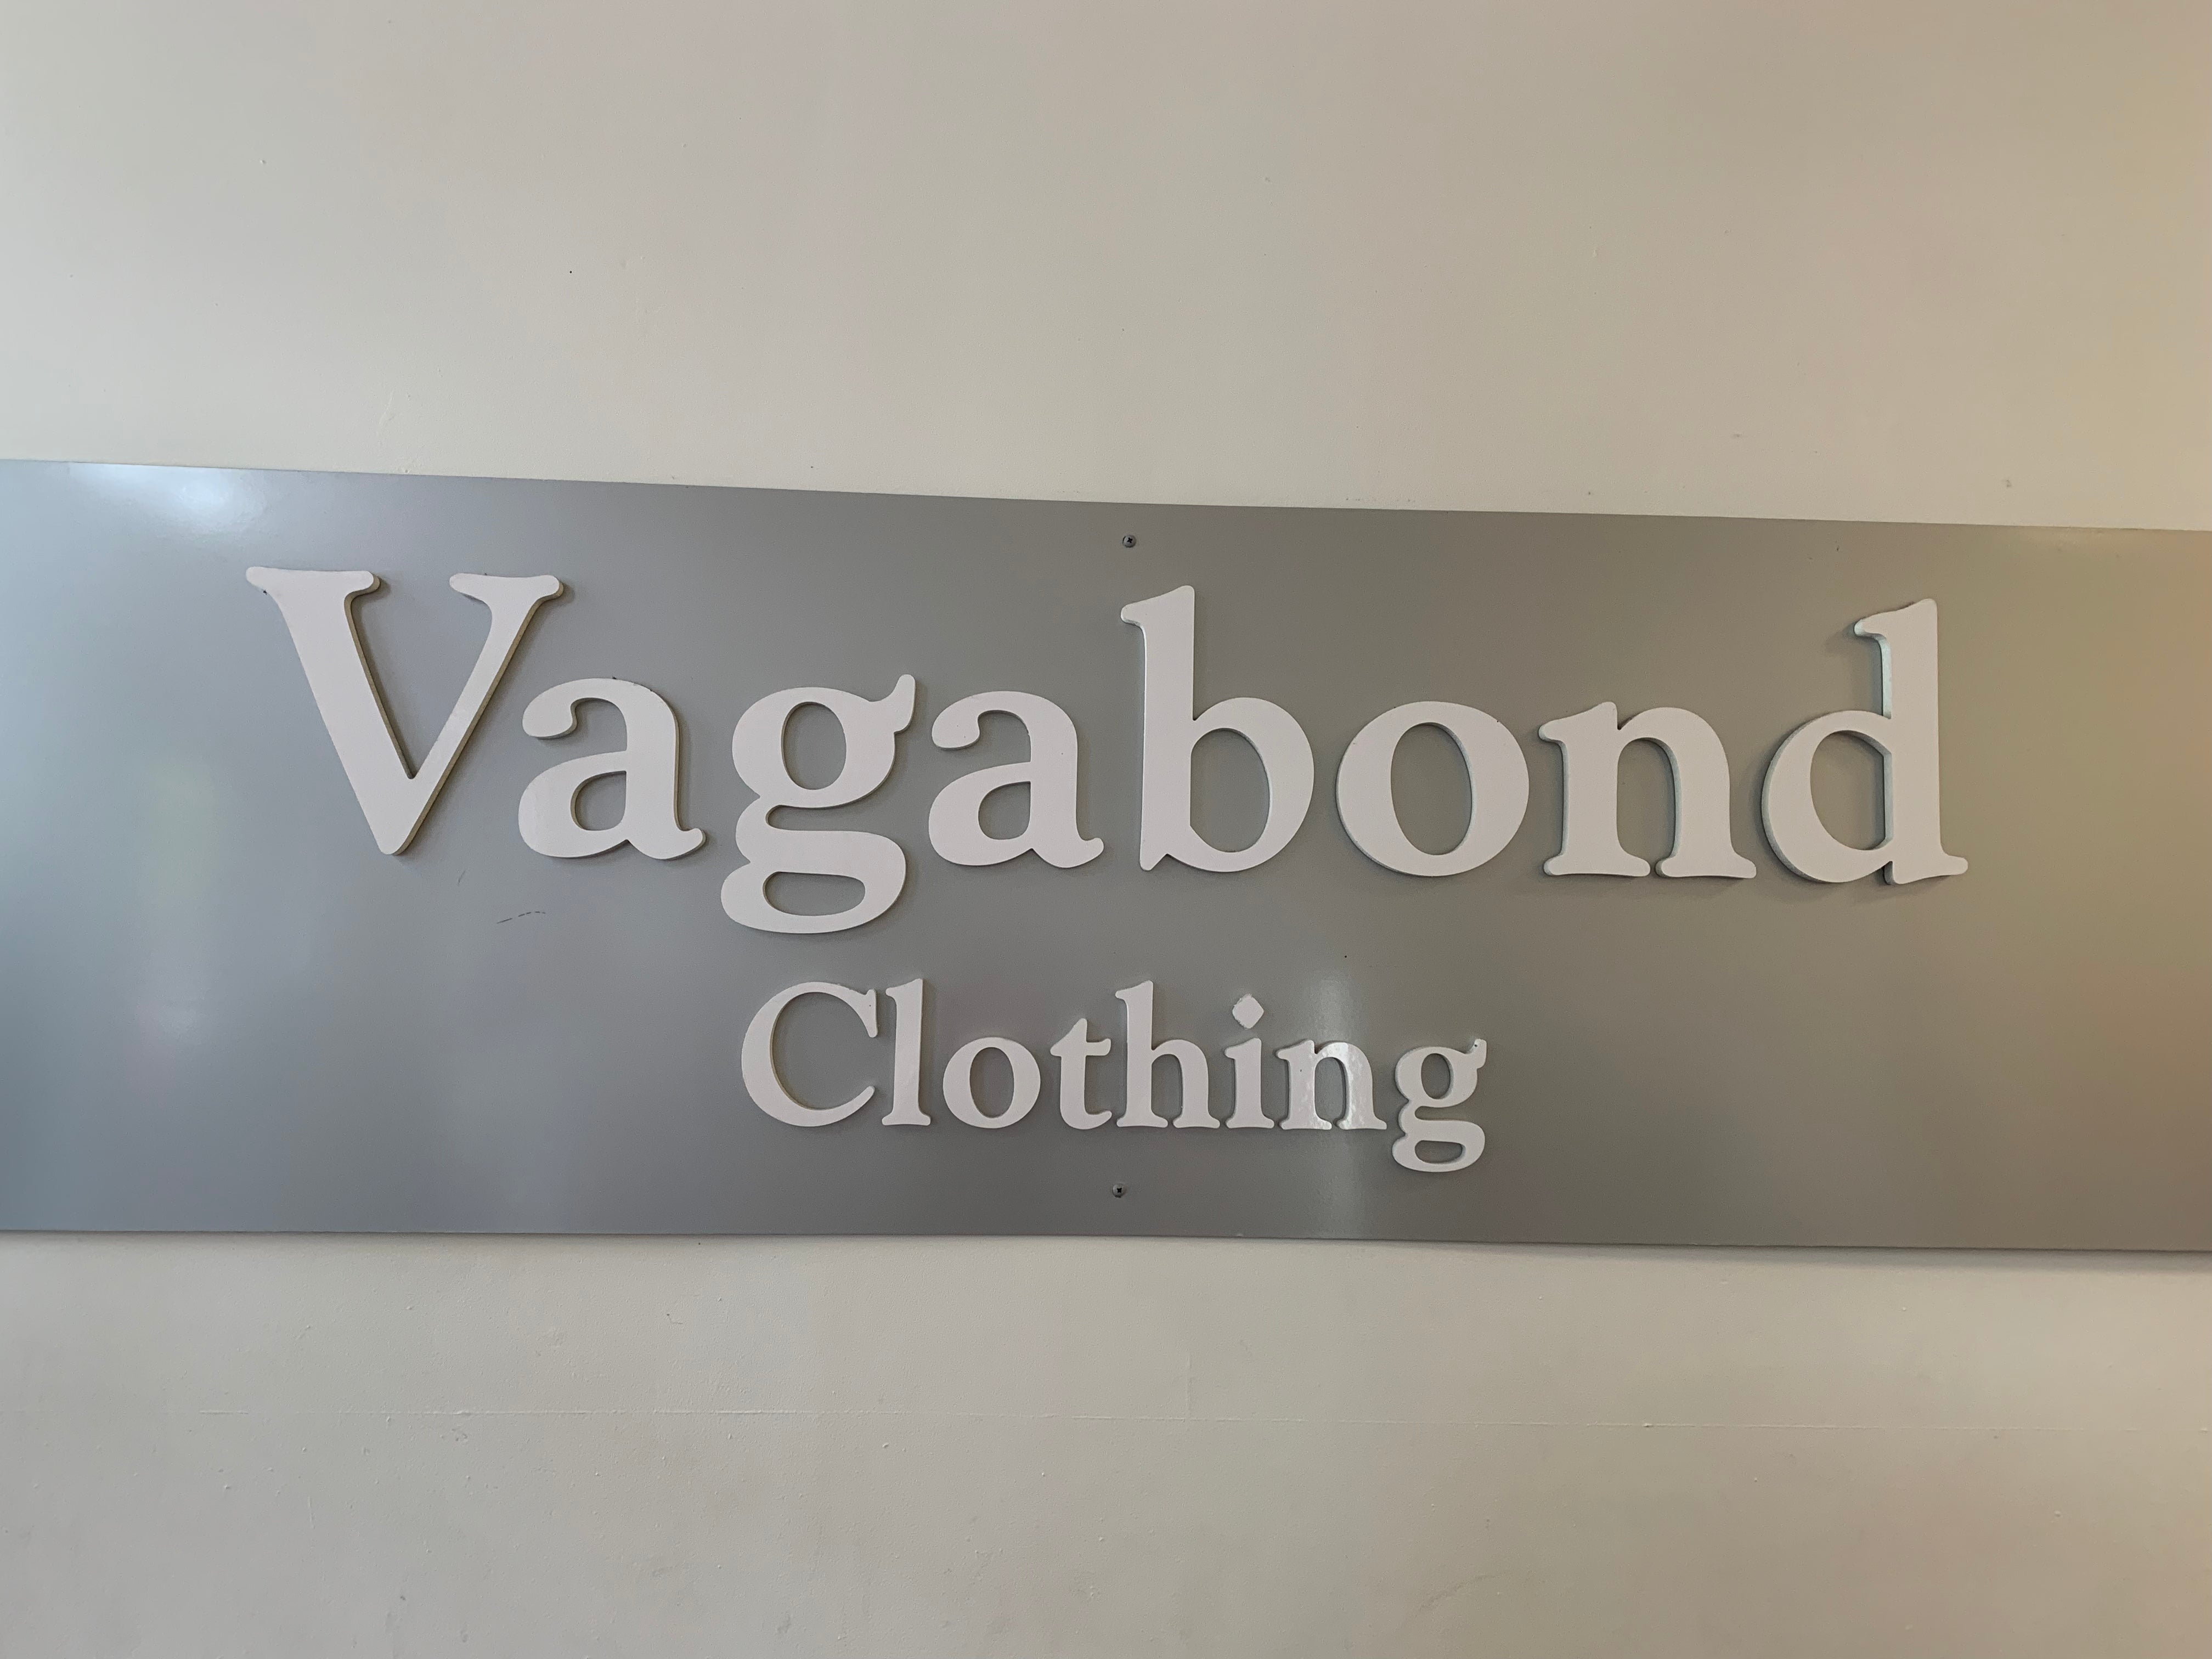 About us – Vagabond Clothing